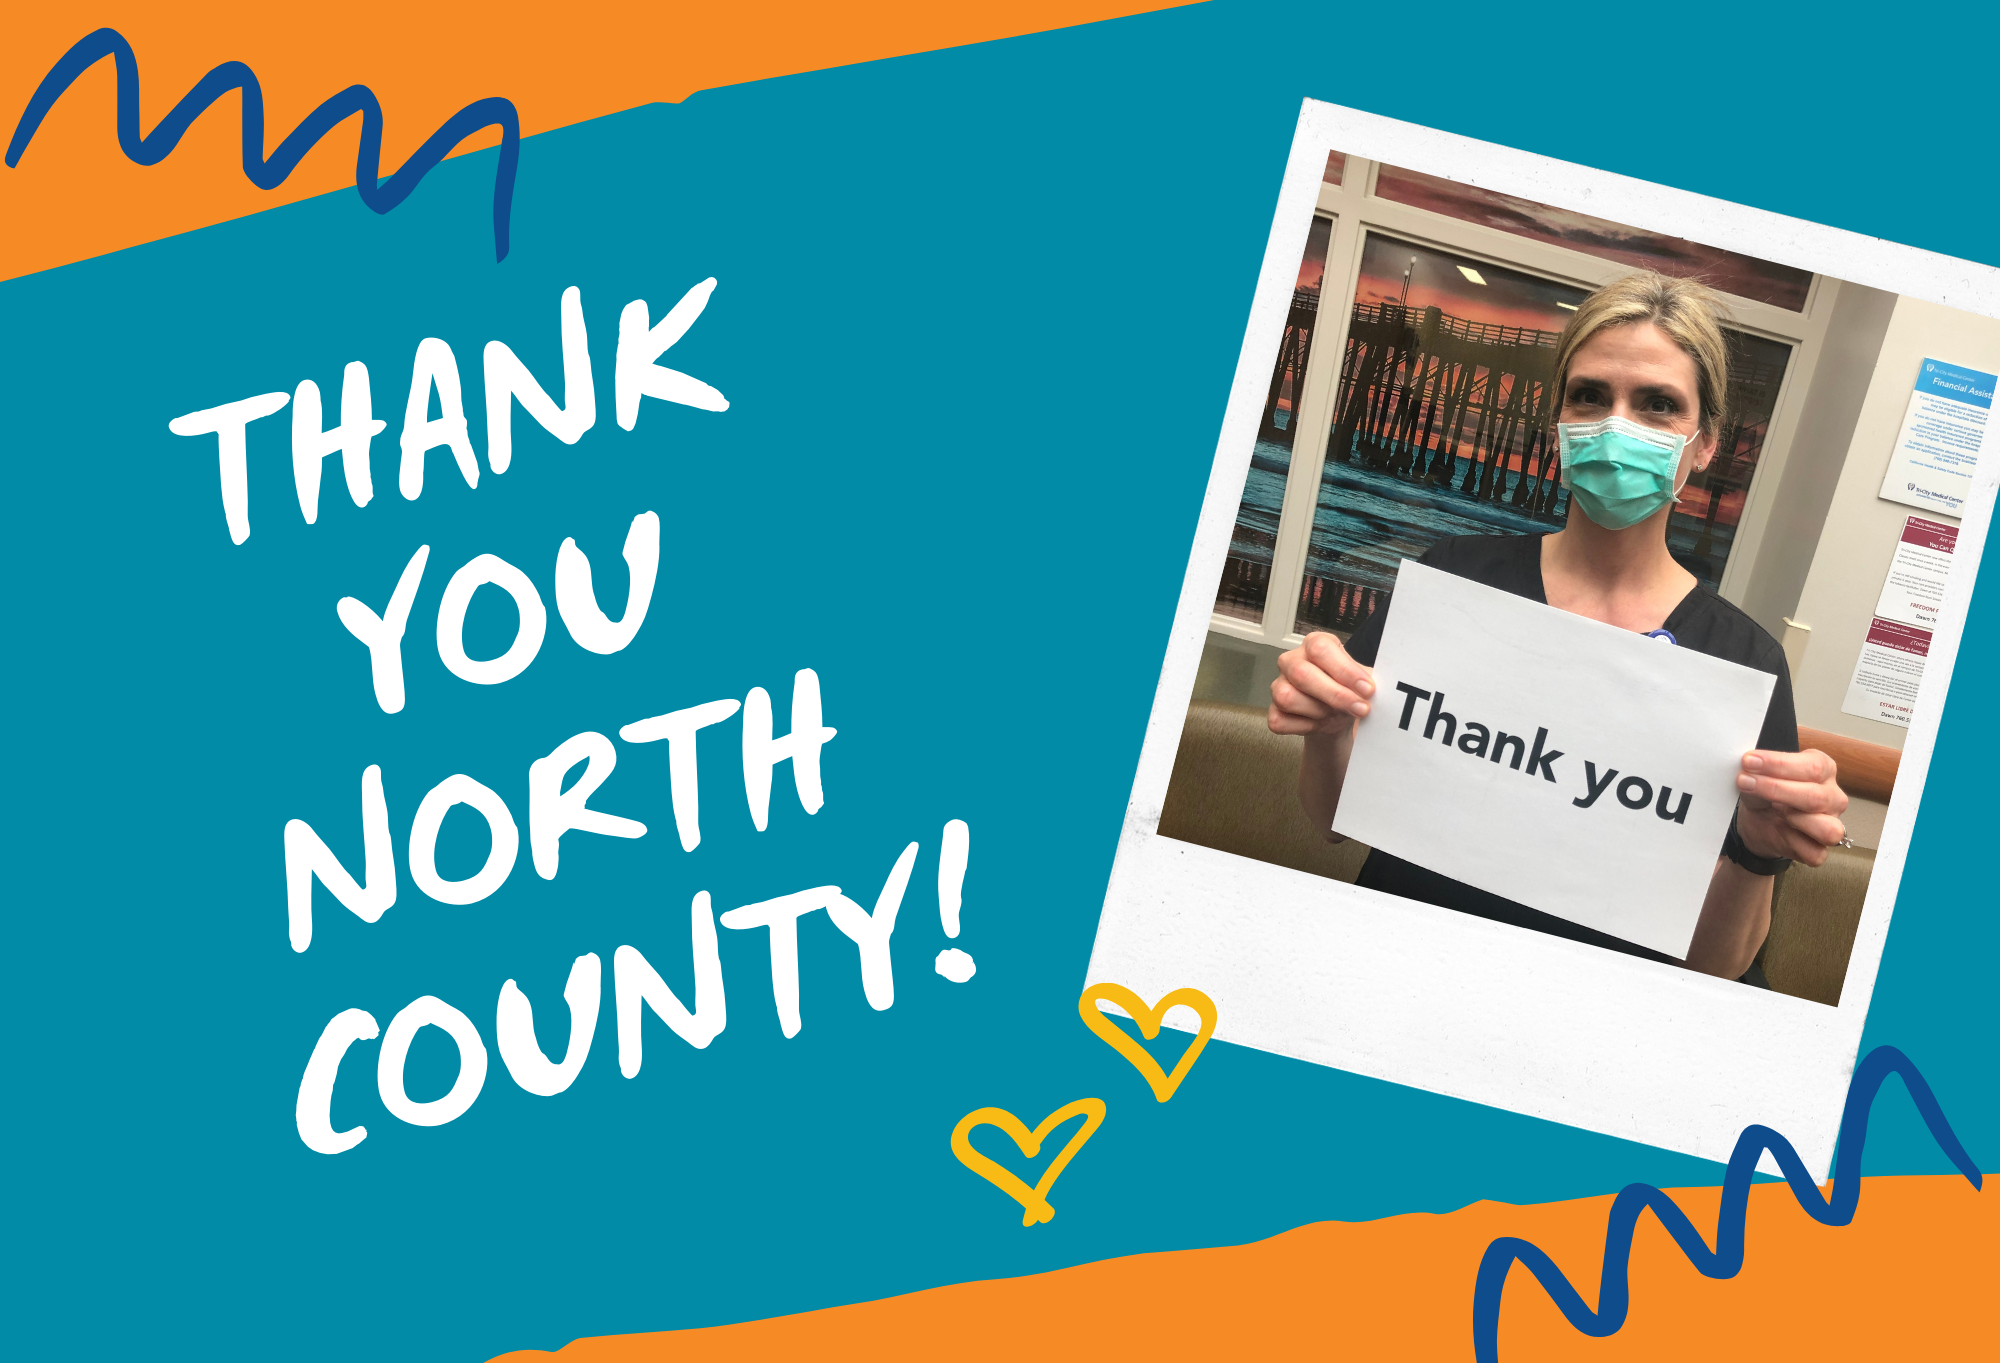 Thank you North County!